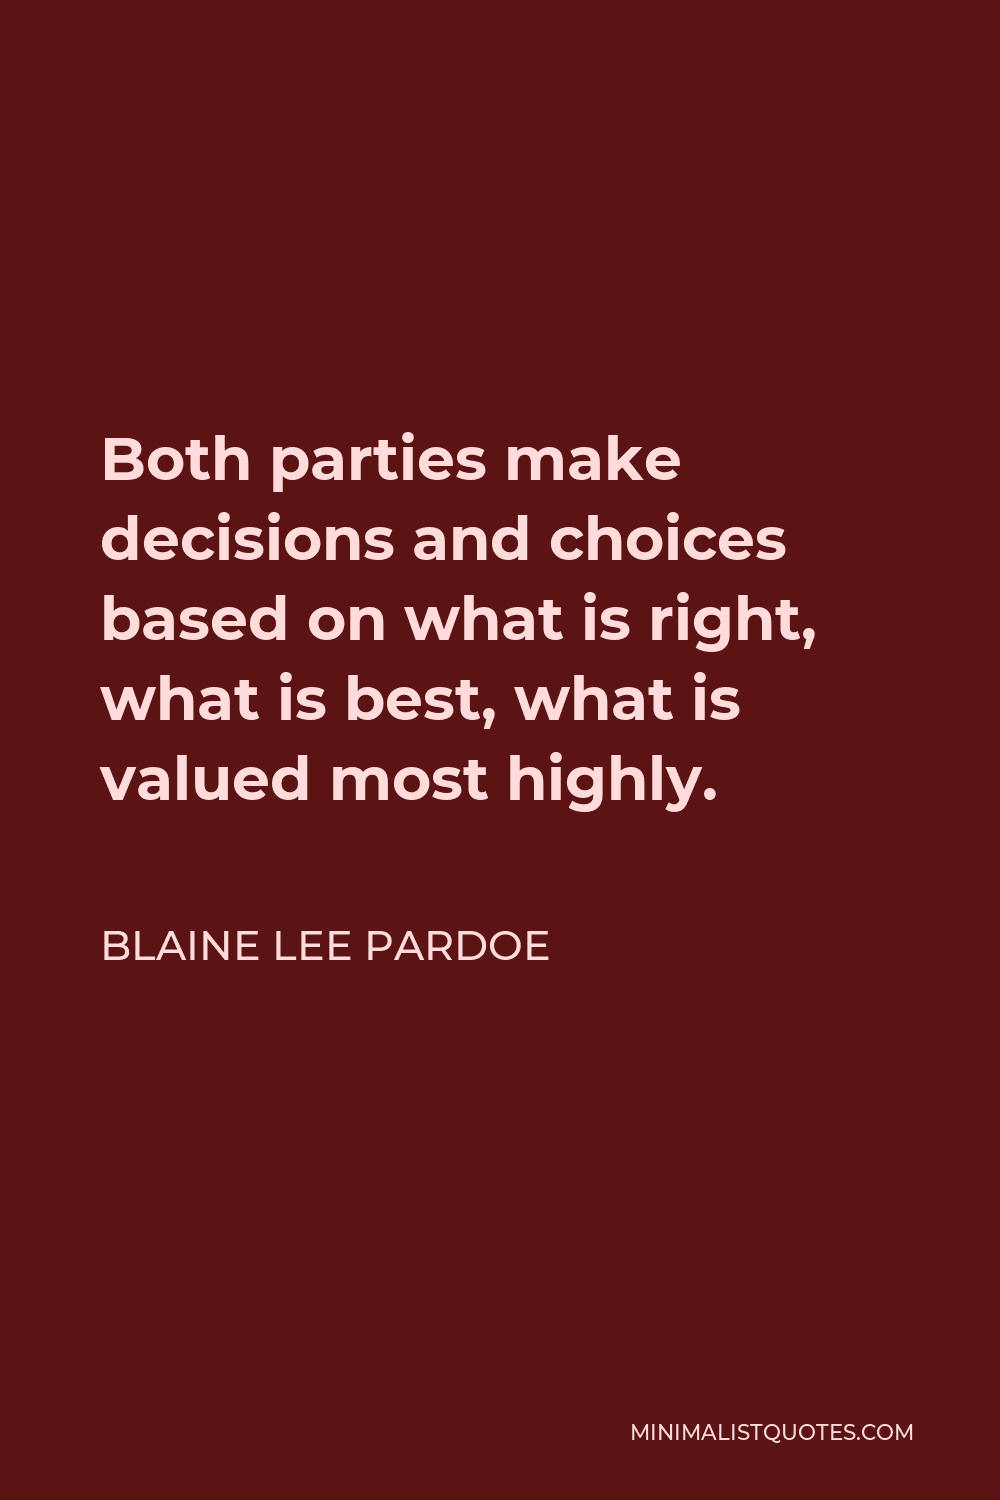 Blaine Lee Pardoe Quote - Both parties make decisions and choices based on what is right, what is best, what is valued most highly.